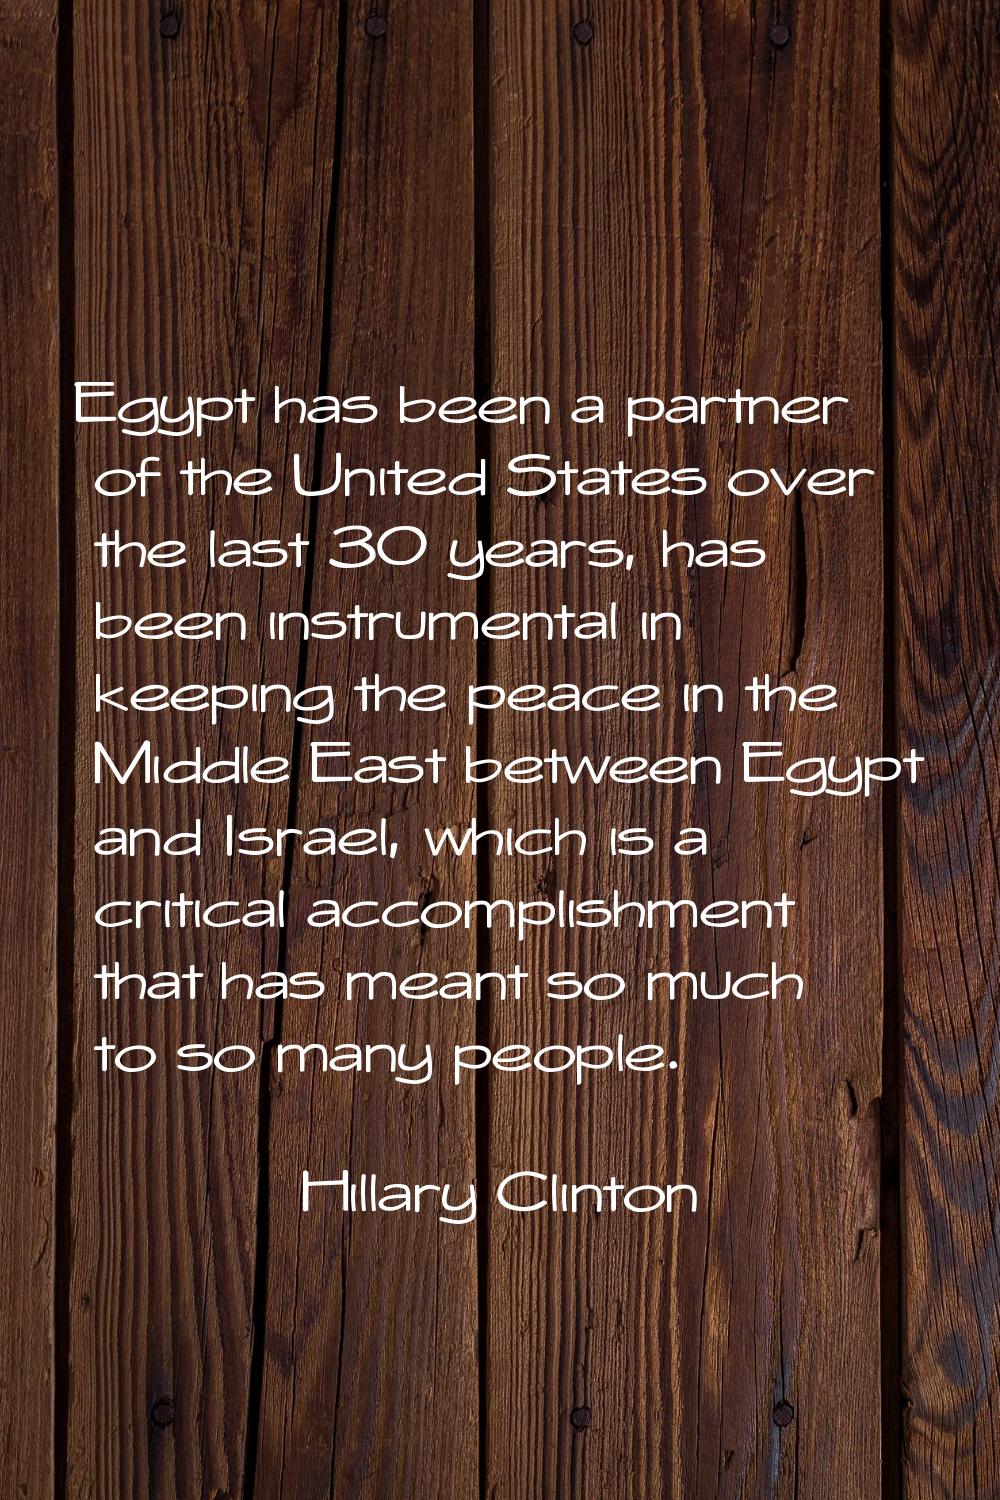 Egypt has been a partner of the United States over the last 30 years, has been instrumental in keep